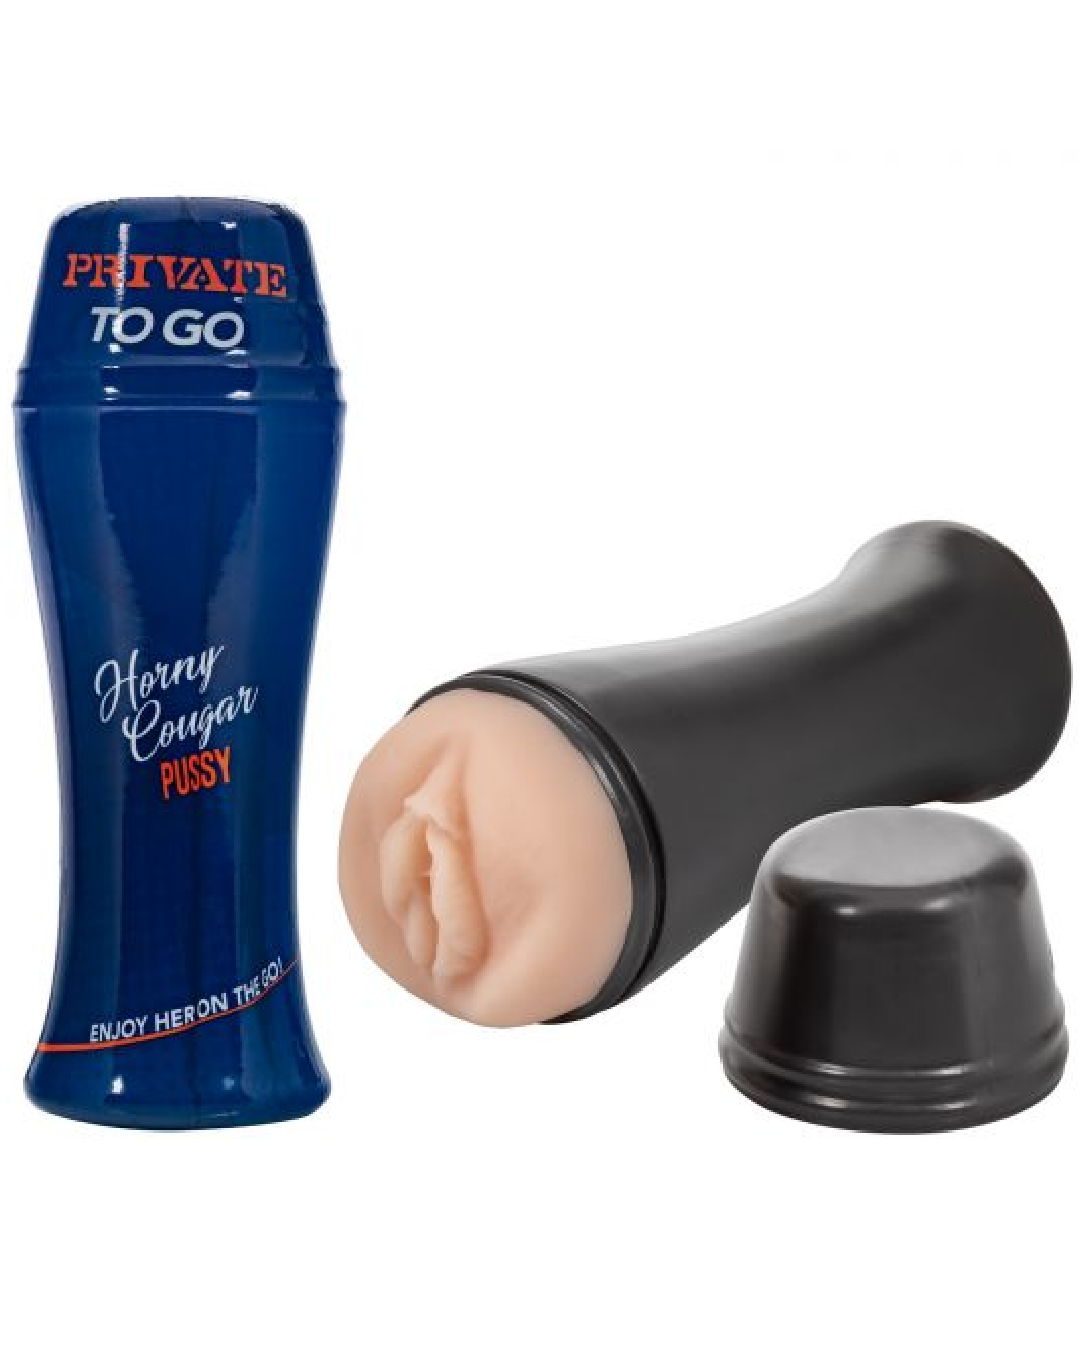 Private Horny Cougar to Go Realistic Travel Stroker (Vagina)  horizontal with lid off and next to another closed tube